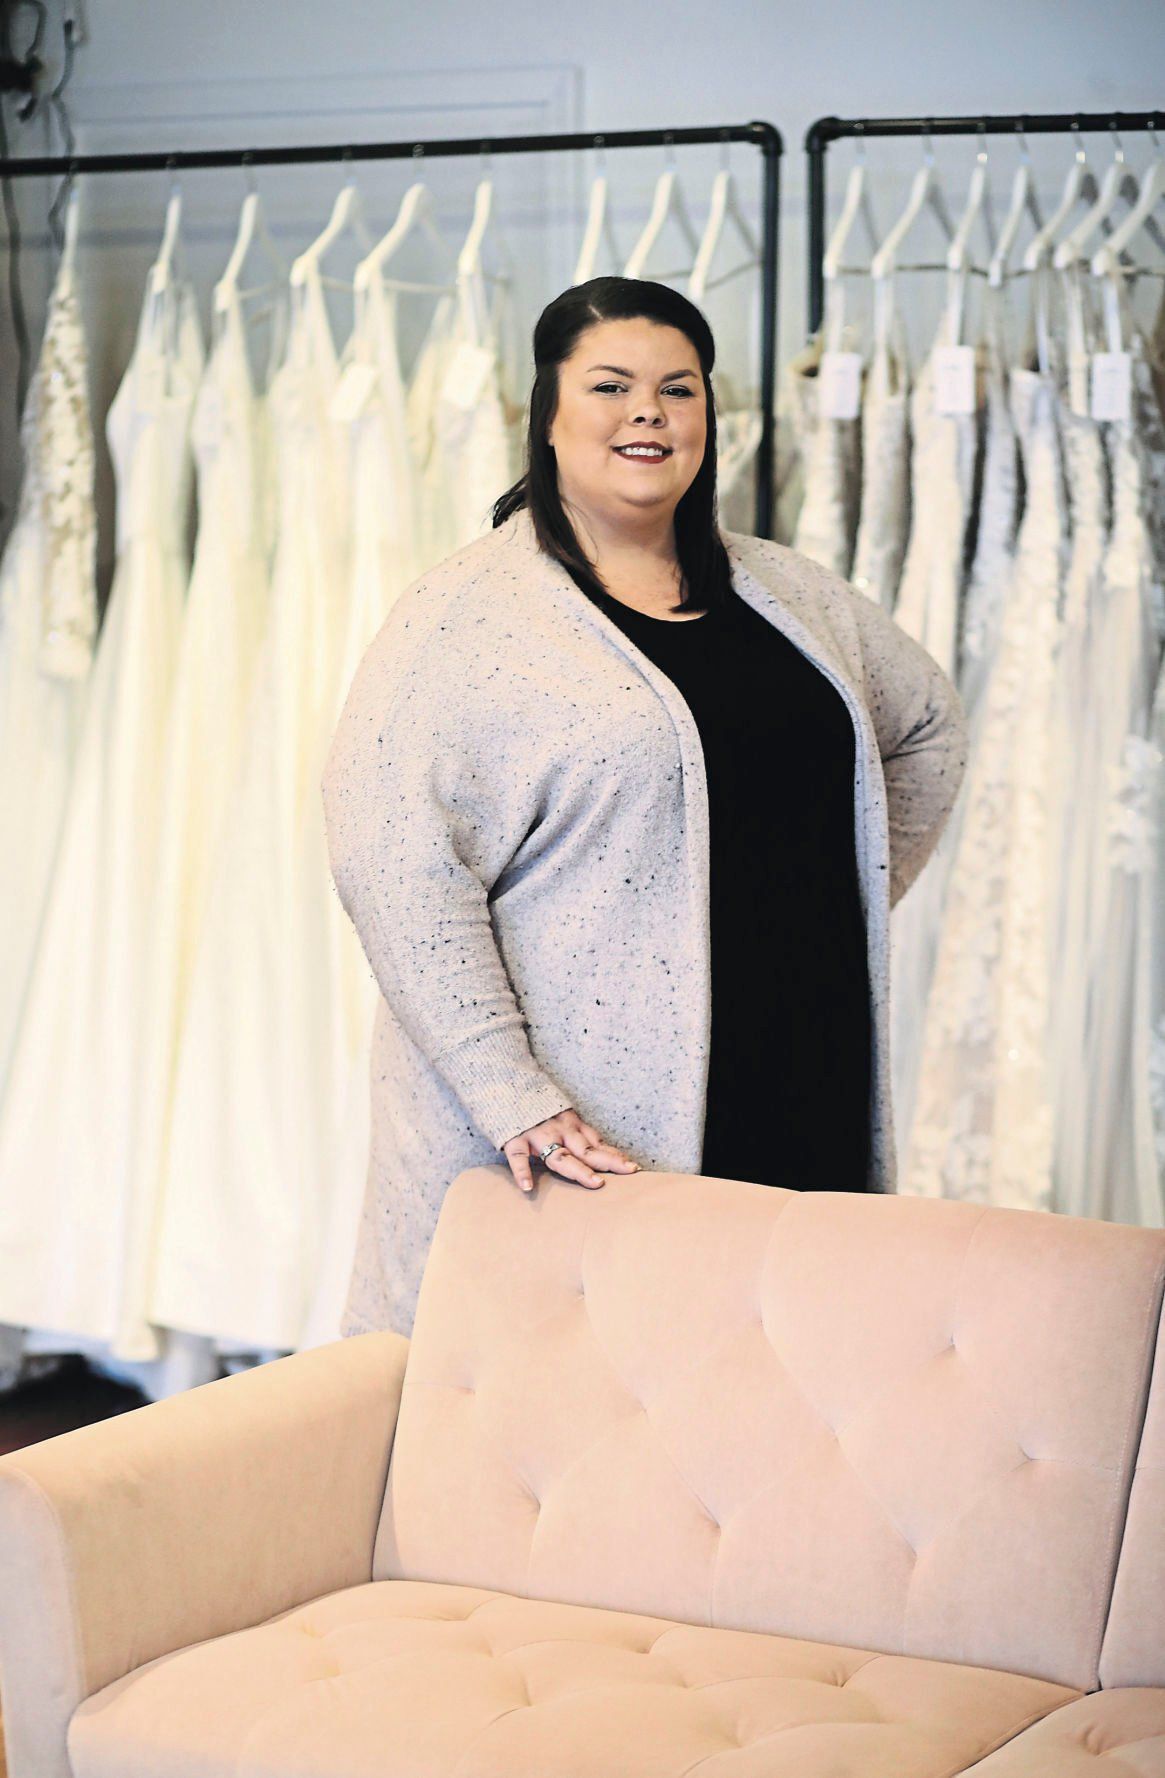 Shelby Duggan owns Vintage Chic Bridal Boutique in Dubuque. Photo taken on Thursday, Dec. 9, 2021.    PHOTO CREDIT: JESSICA REILLY